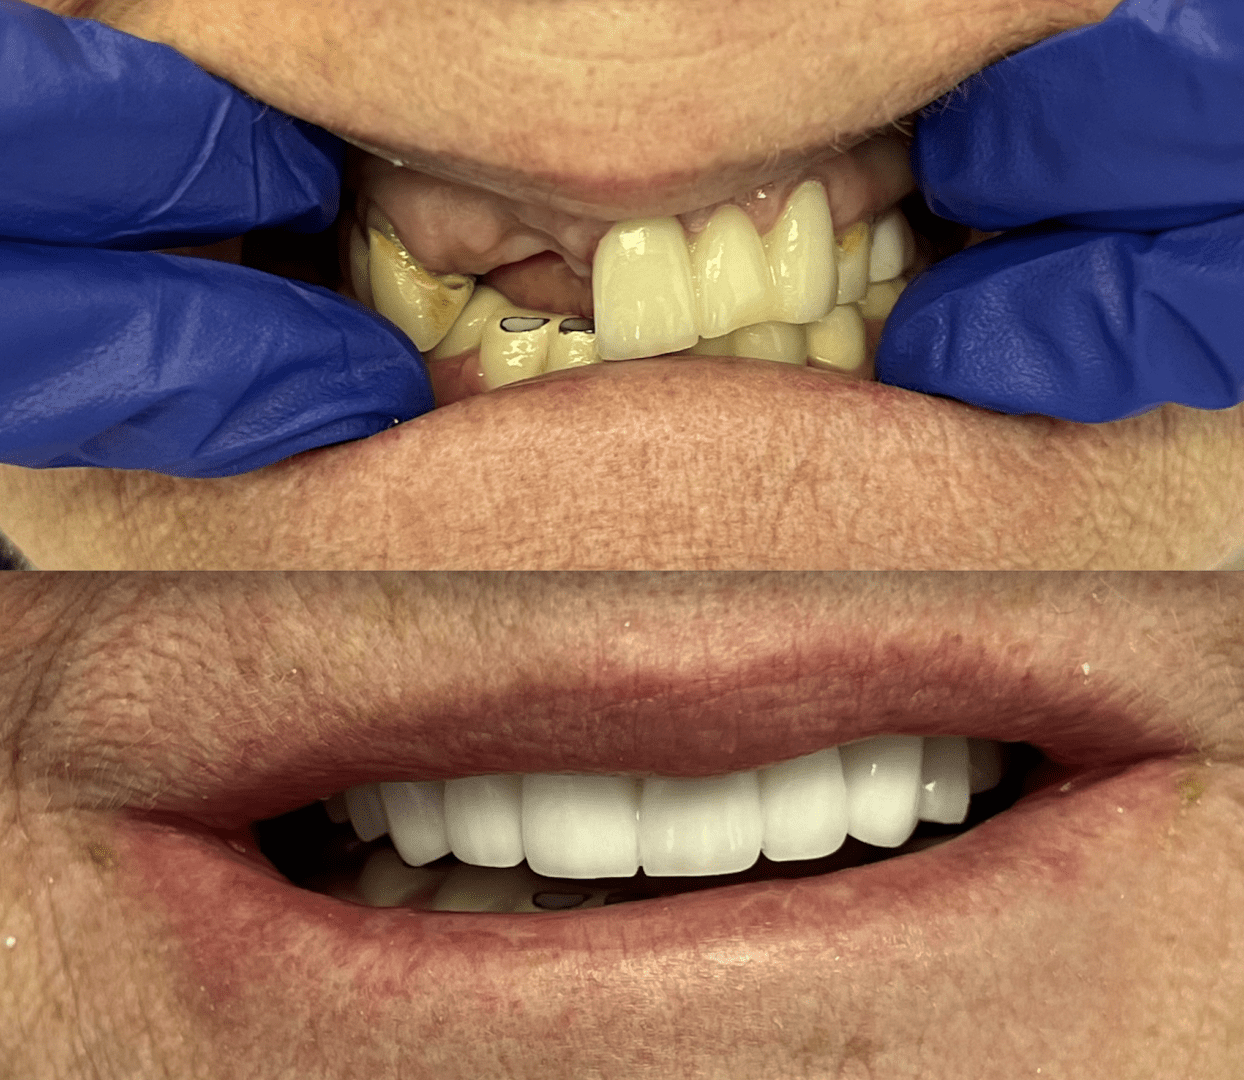 A before and after picture of the teeth being cleaned.